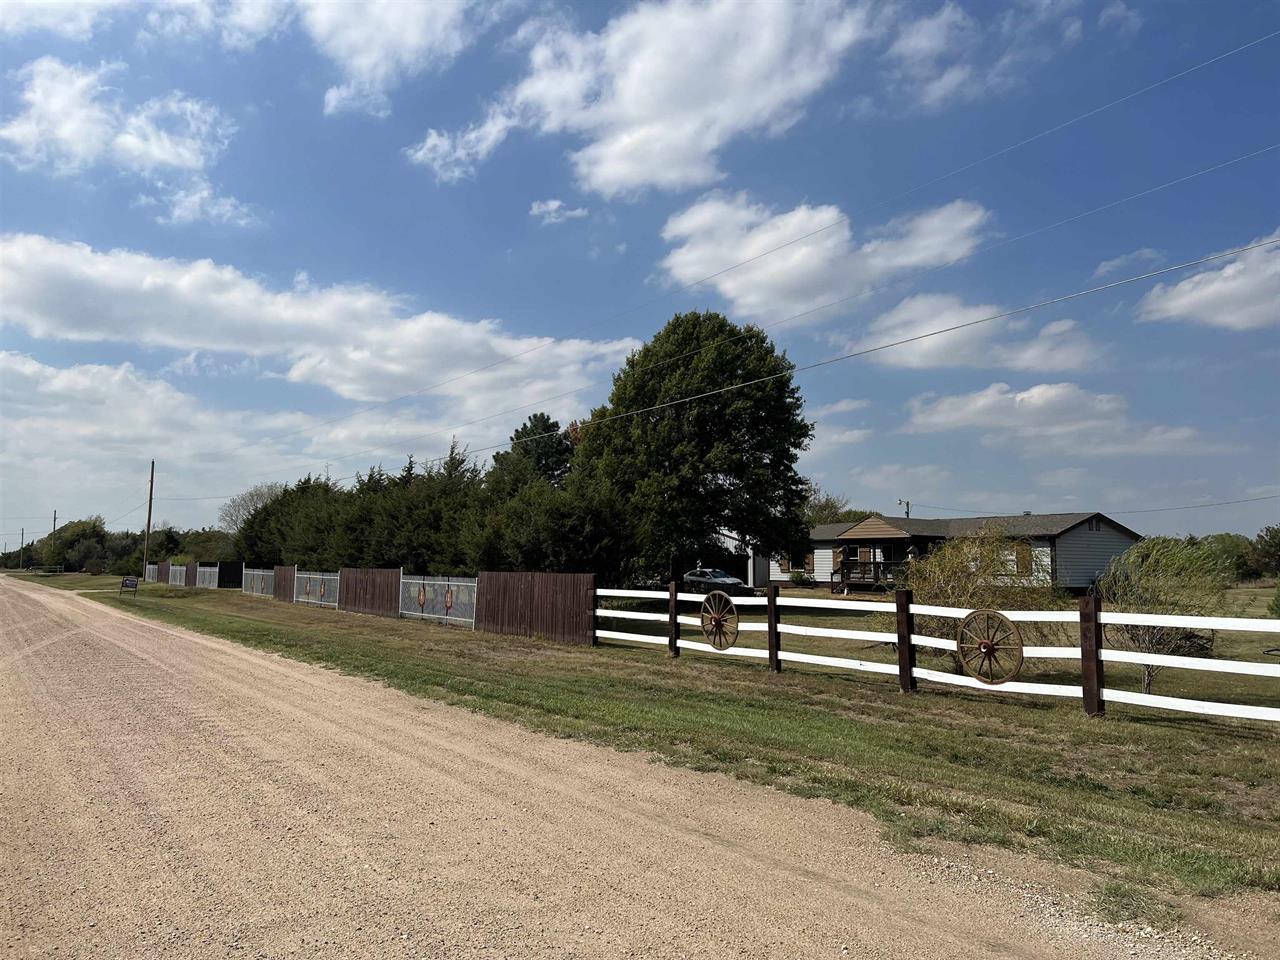 For Sale: 9124 W 82ND, Valley Center KS